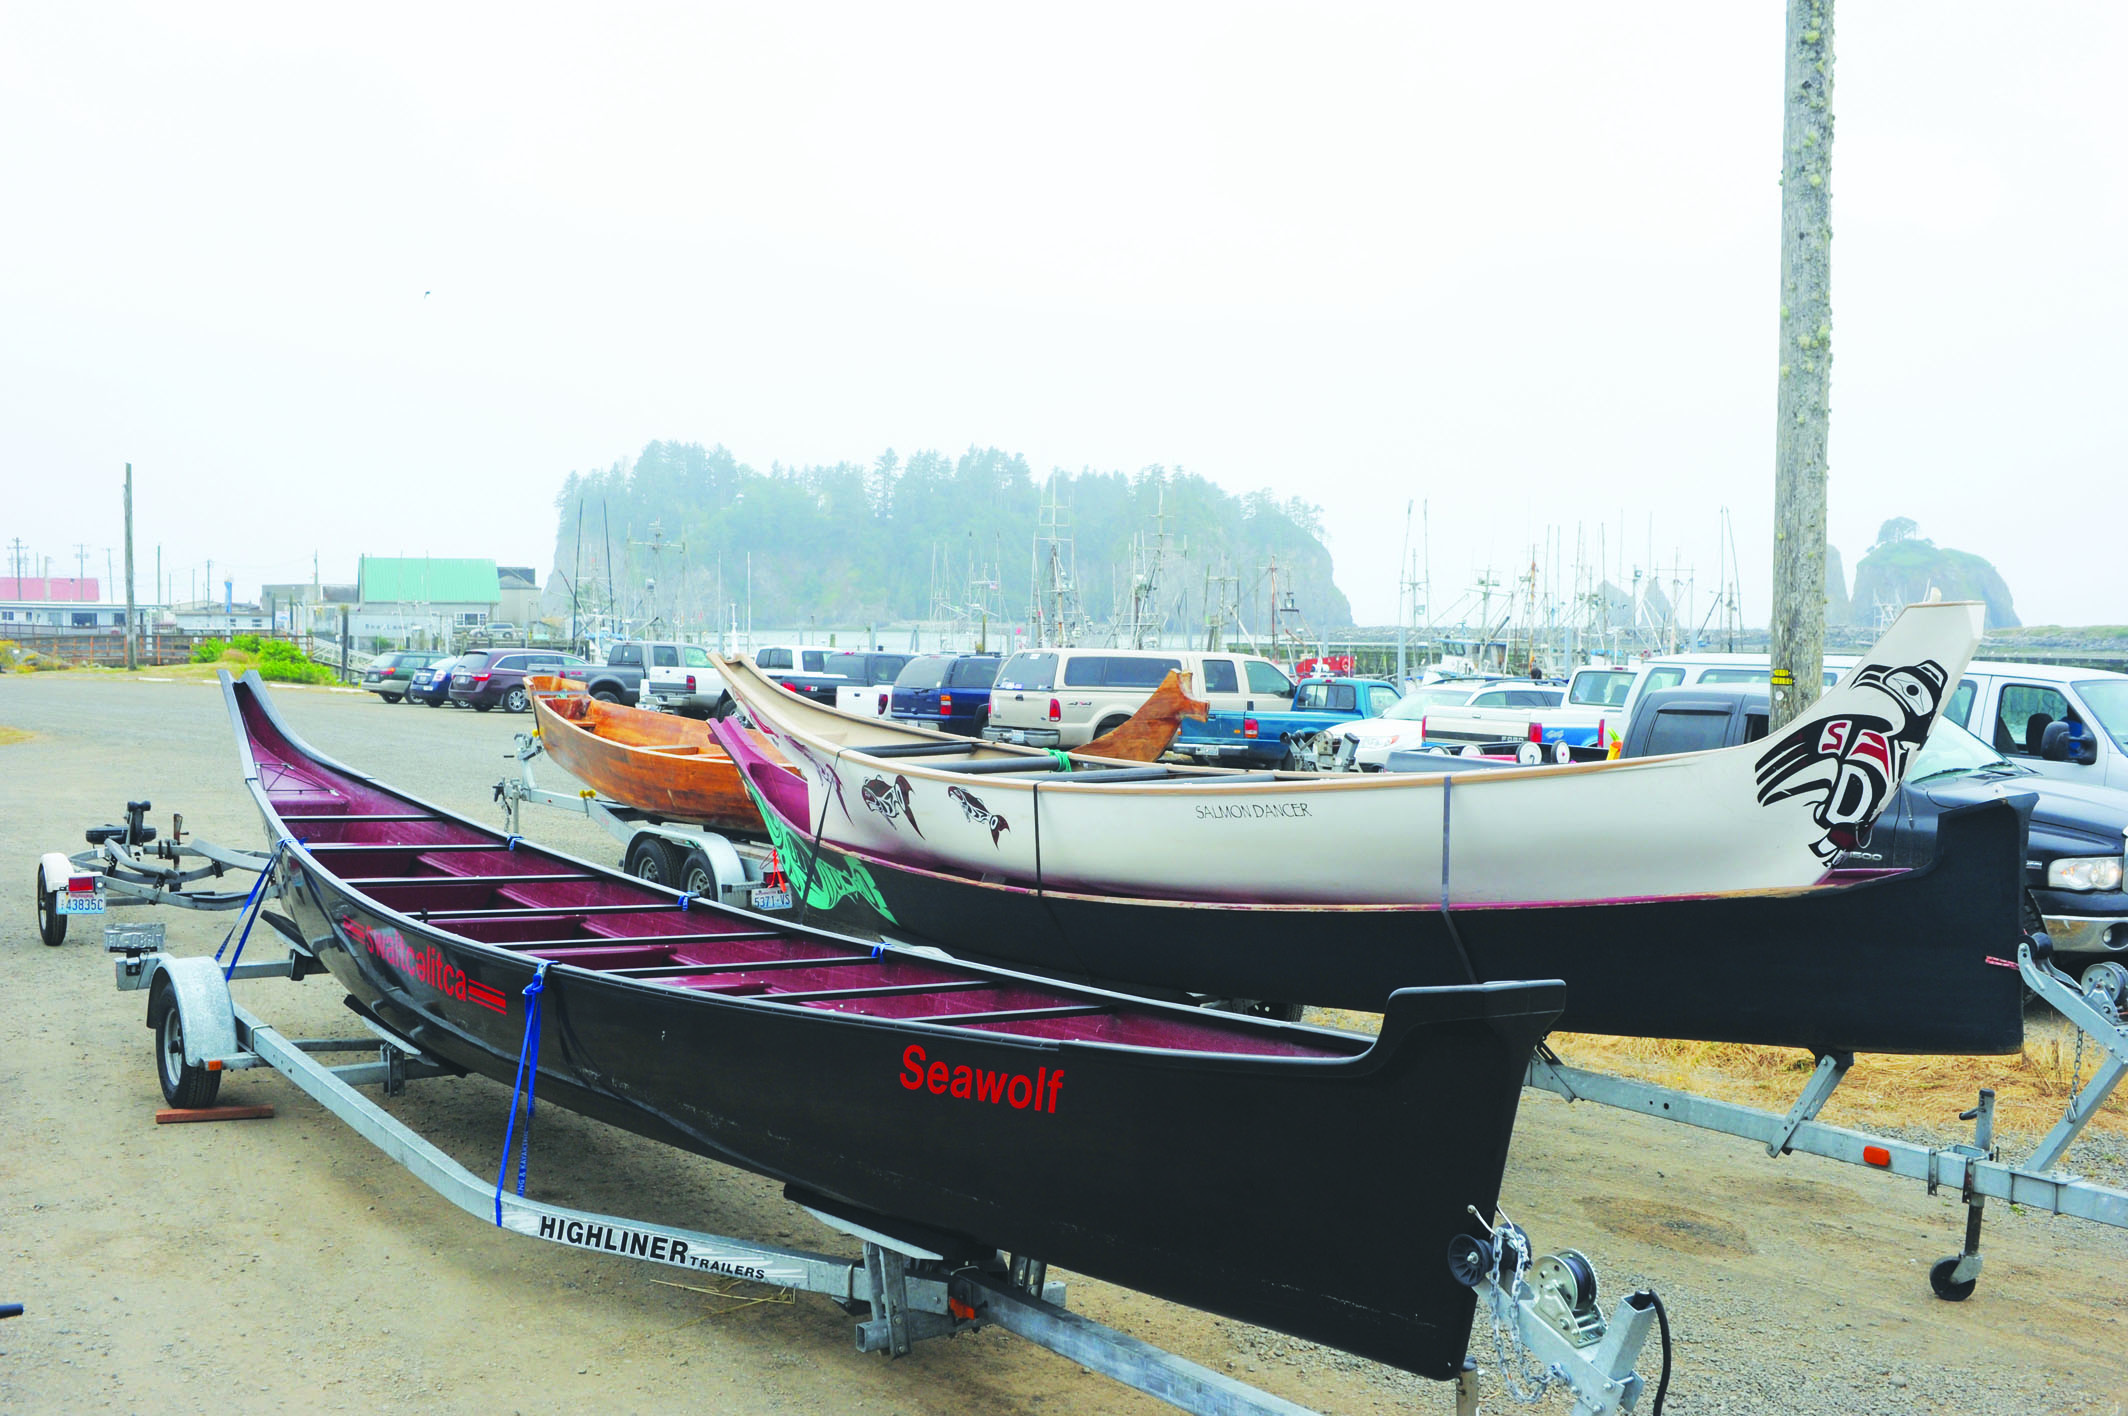 Some canoes had to be trailered in to LaPush Marina due to the conditions in the ocean. Lonnie Archibald/for Peninsula Daily News